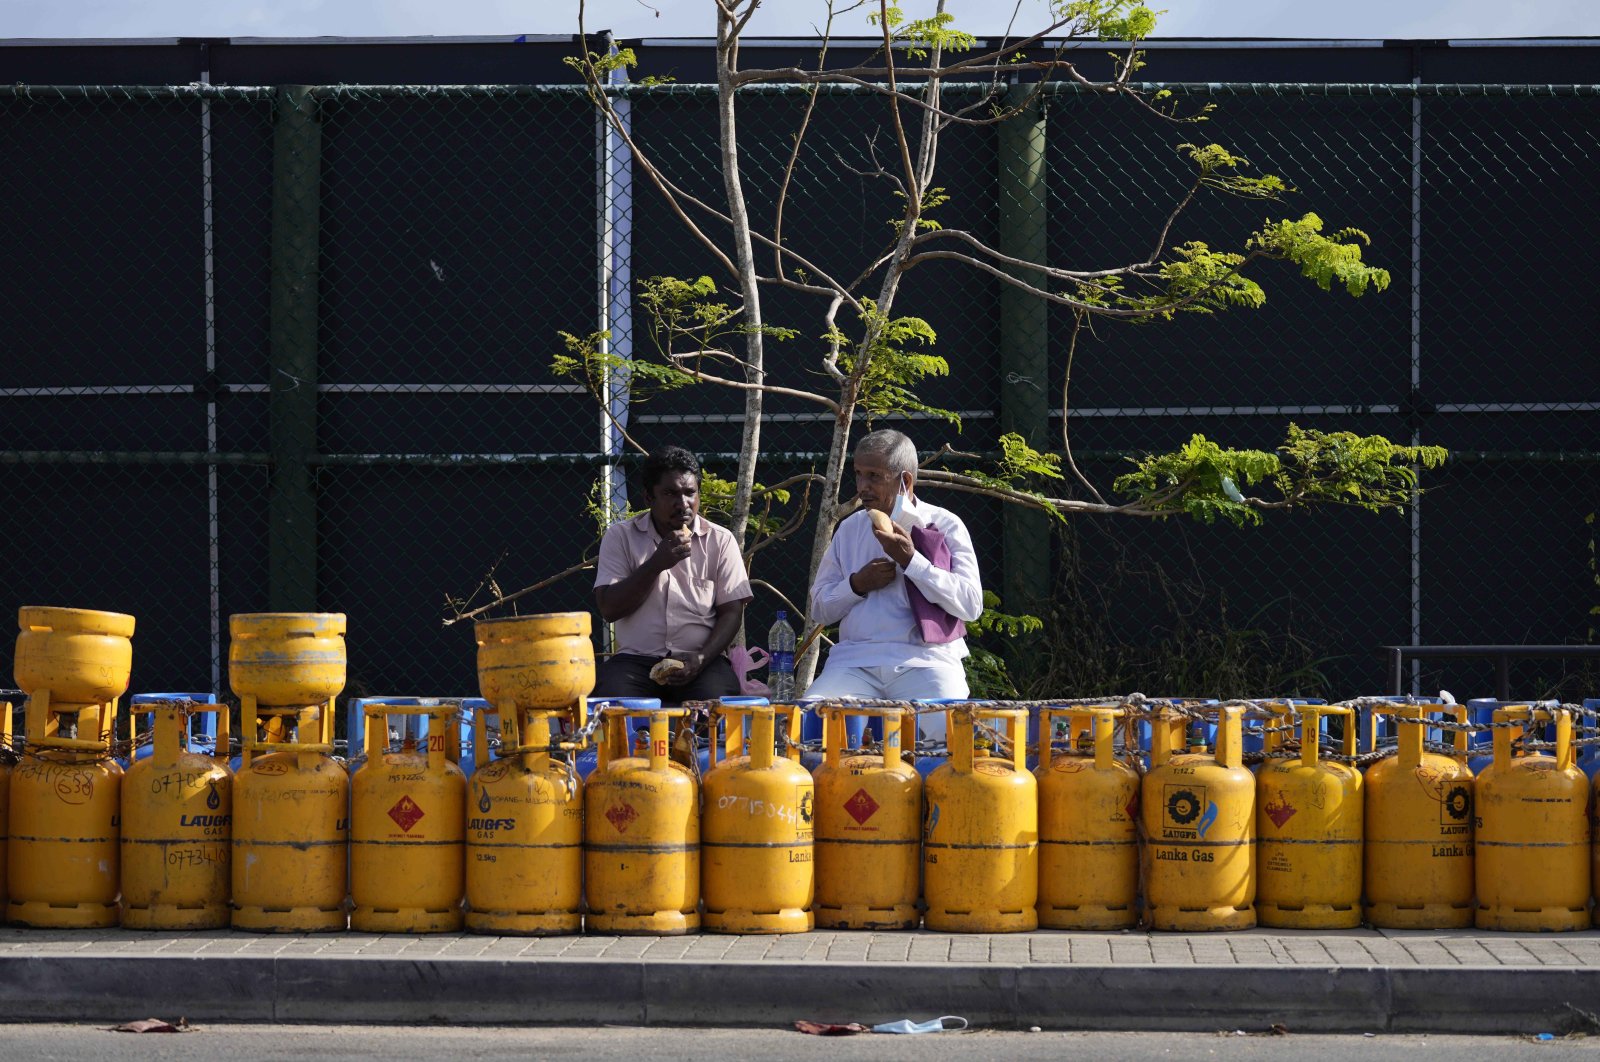 People have breakfast while sitting by a line of empty gas canisters that are placed outside the Galle International Cricket Stadium, in Galle, Sri Lanka, June 28, 2022. (AP Photo)